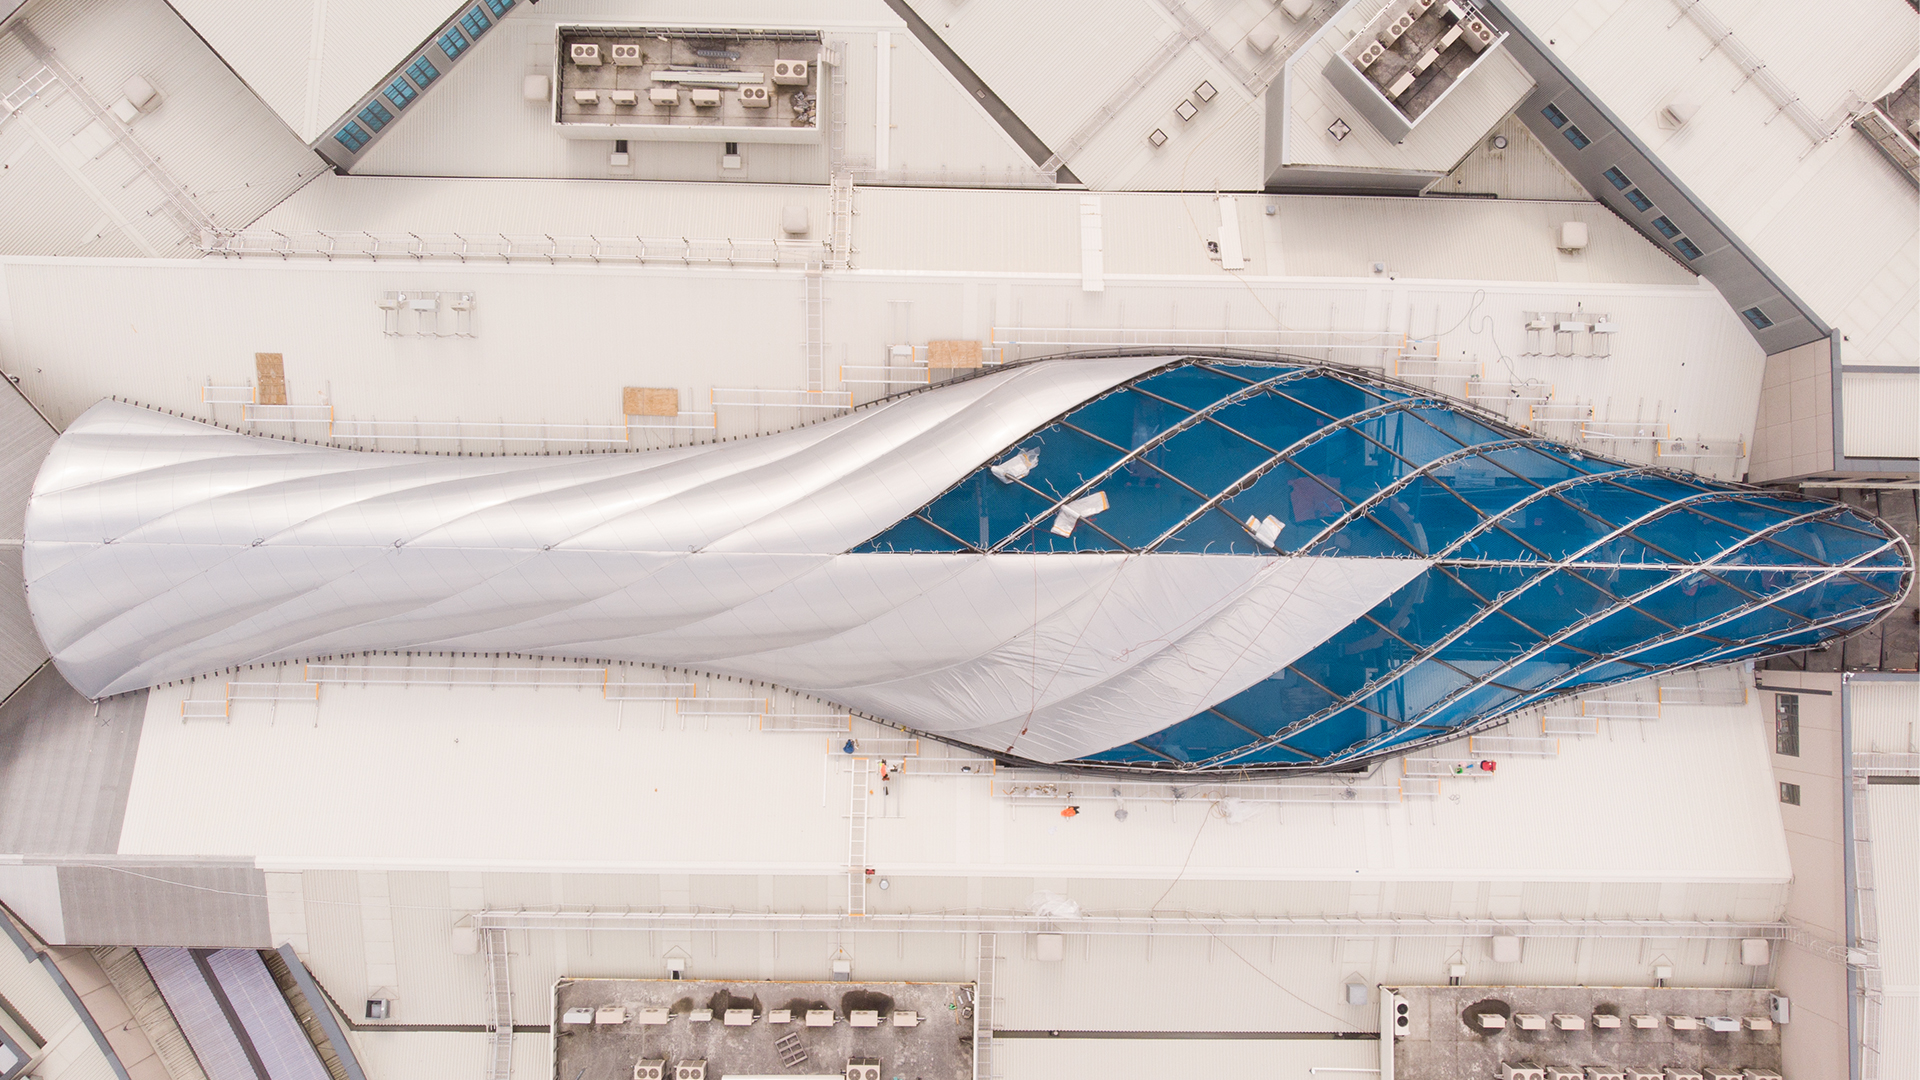 Botany Town Shopping Center: The ETFE cushions warp across the base steelworks frame to give a visually stunning effect.